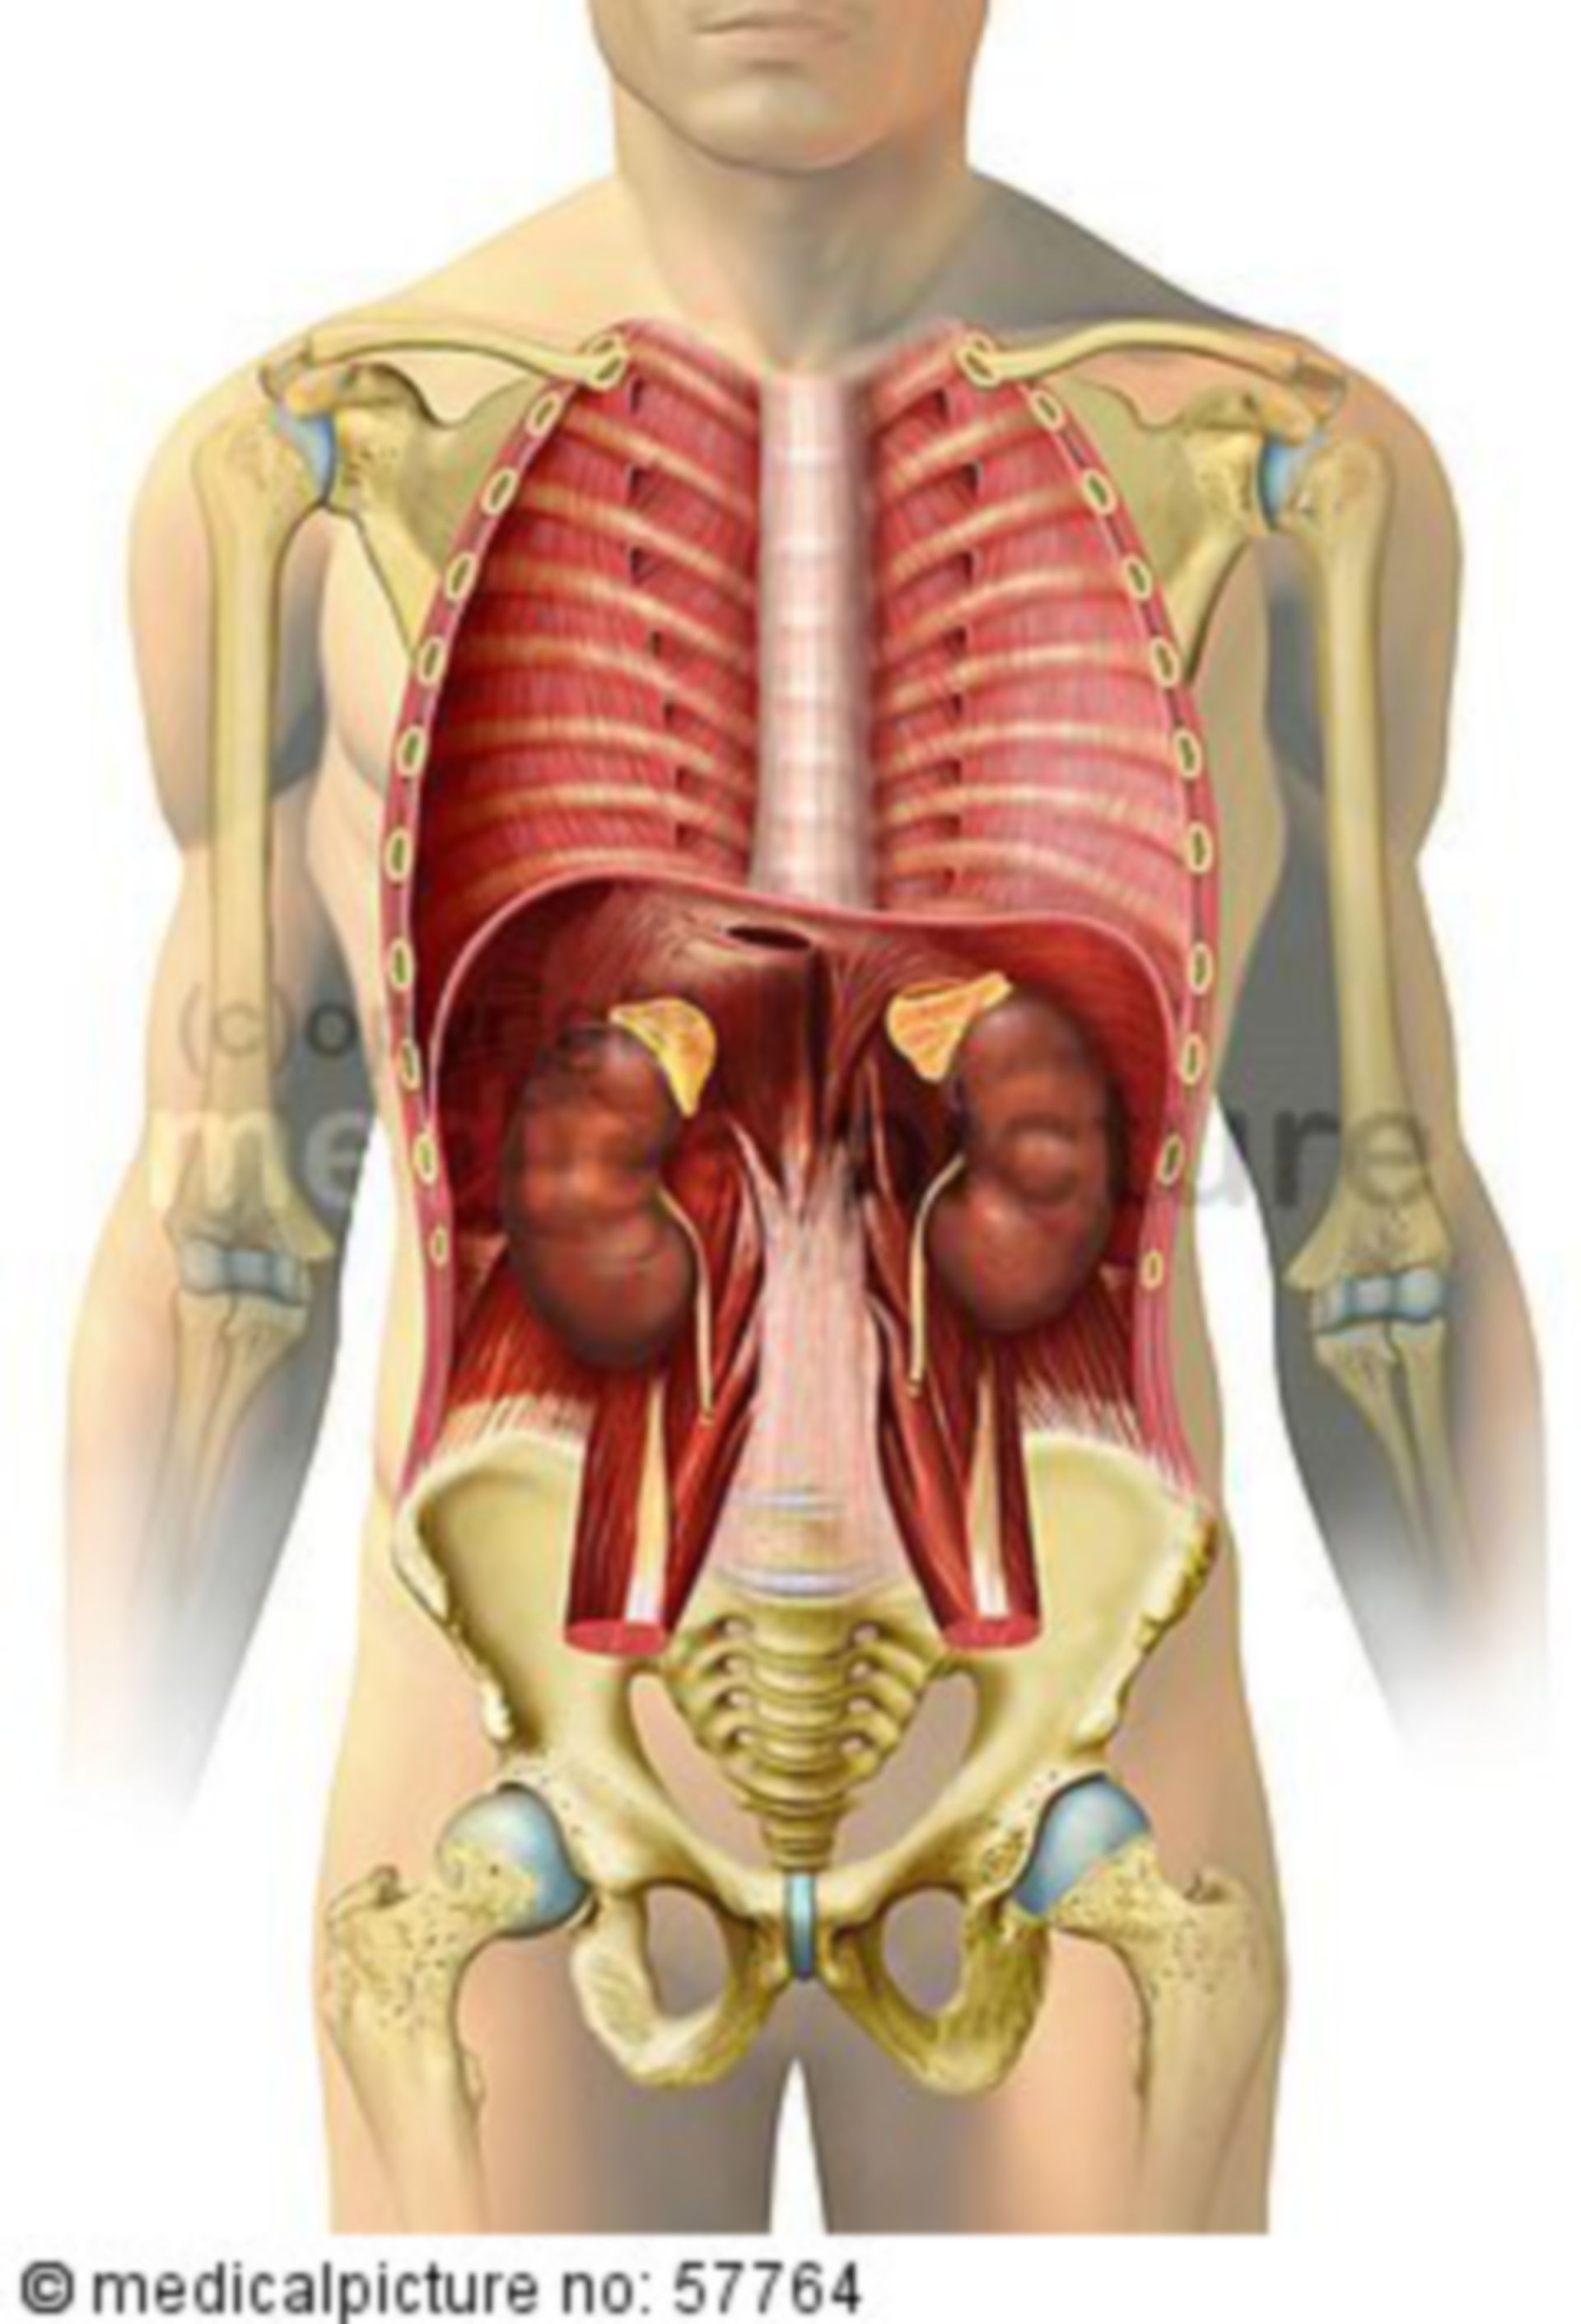 Anatomical illustrations - kidney and adrenal gland